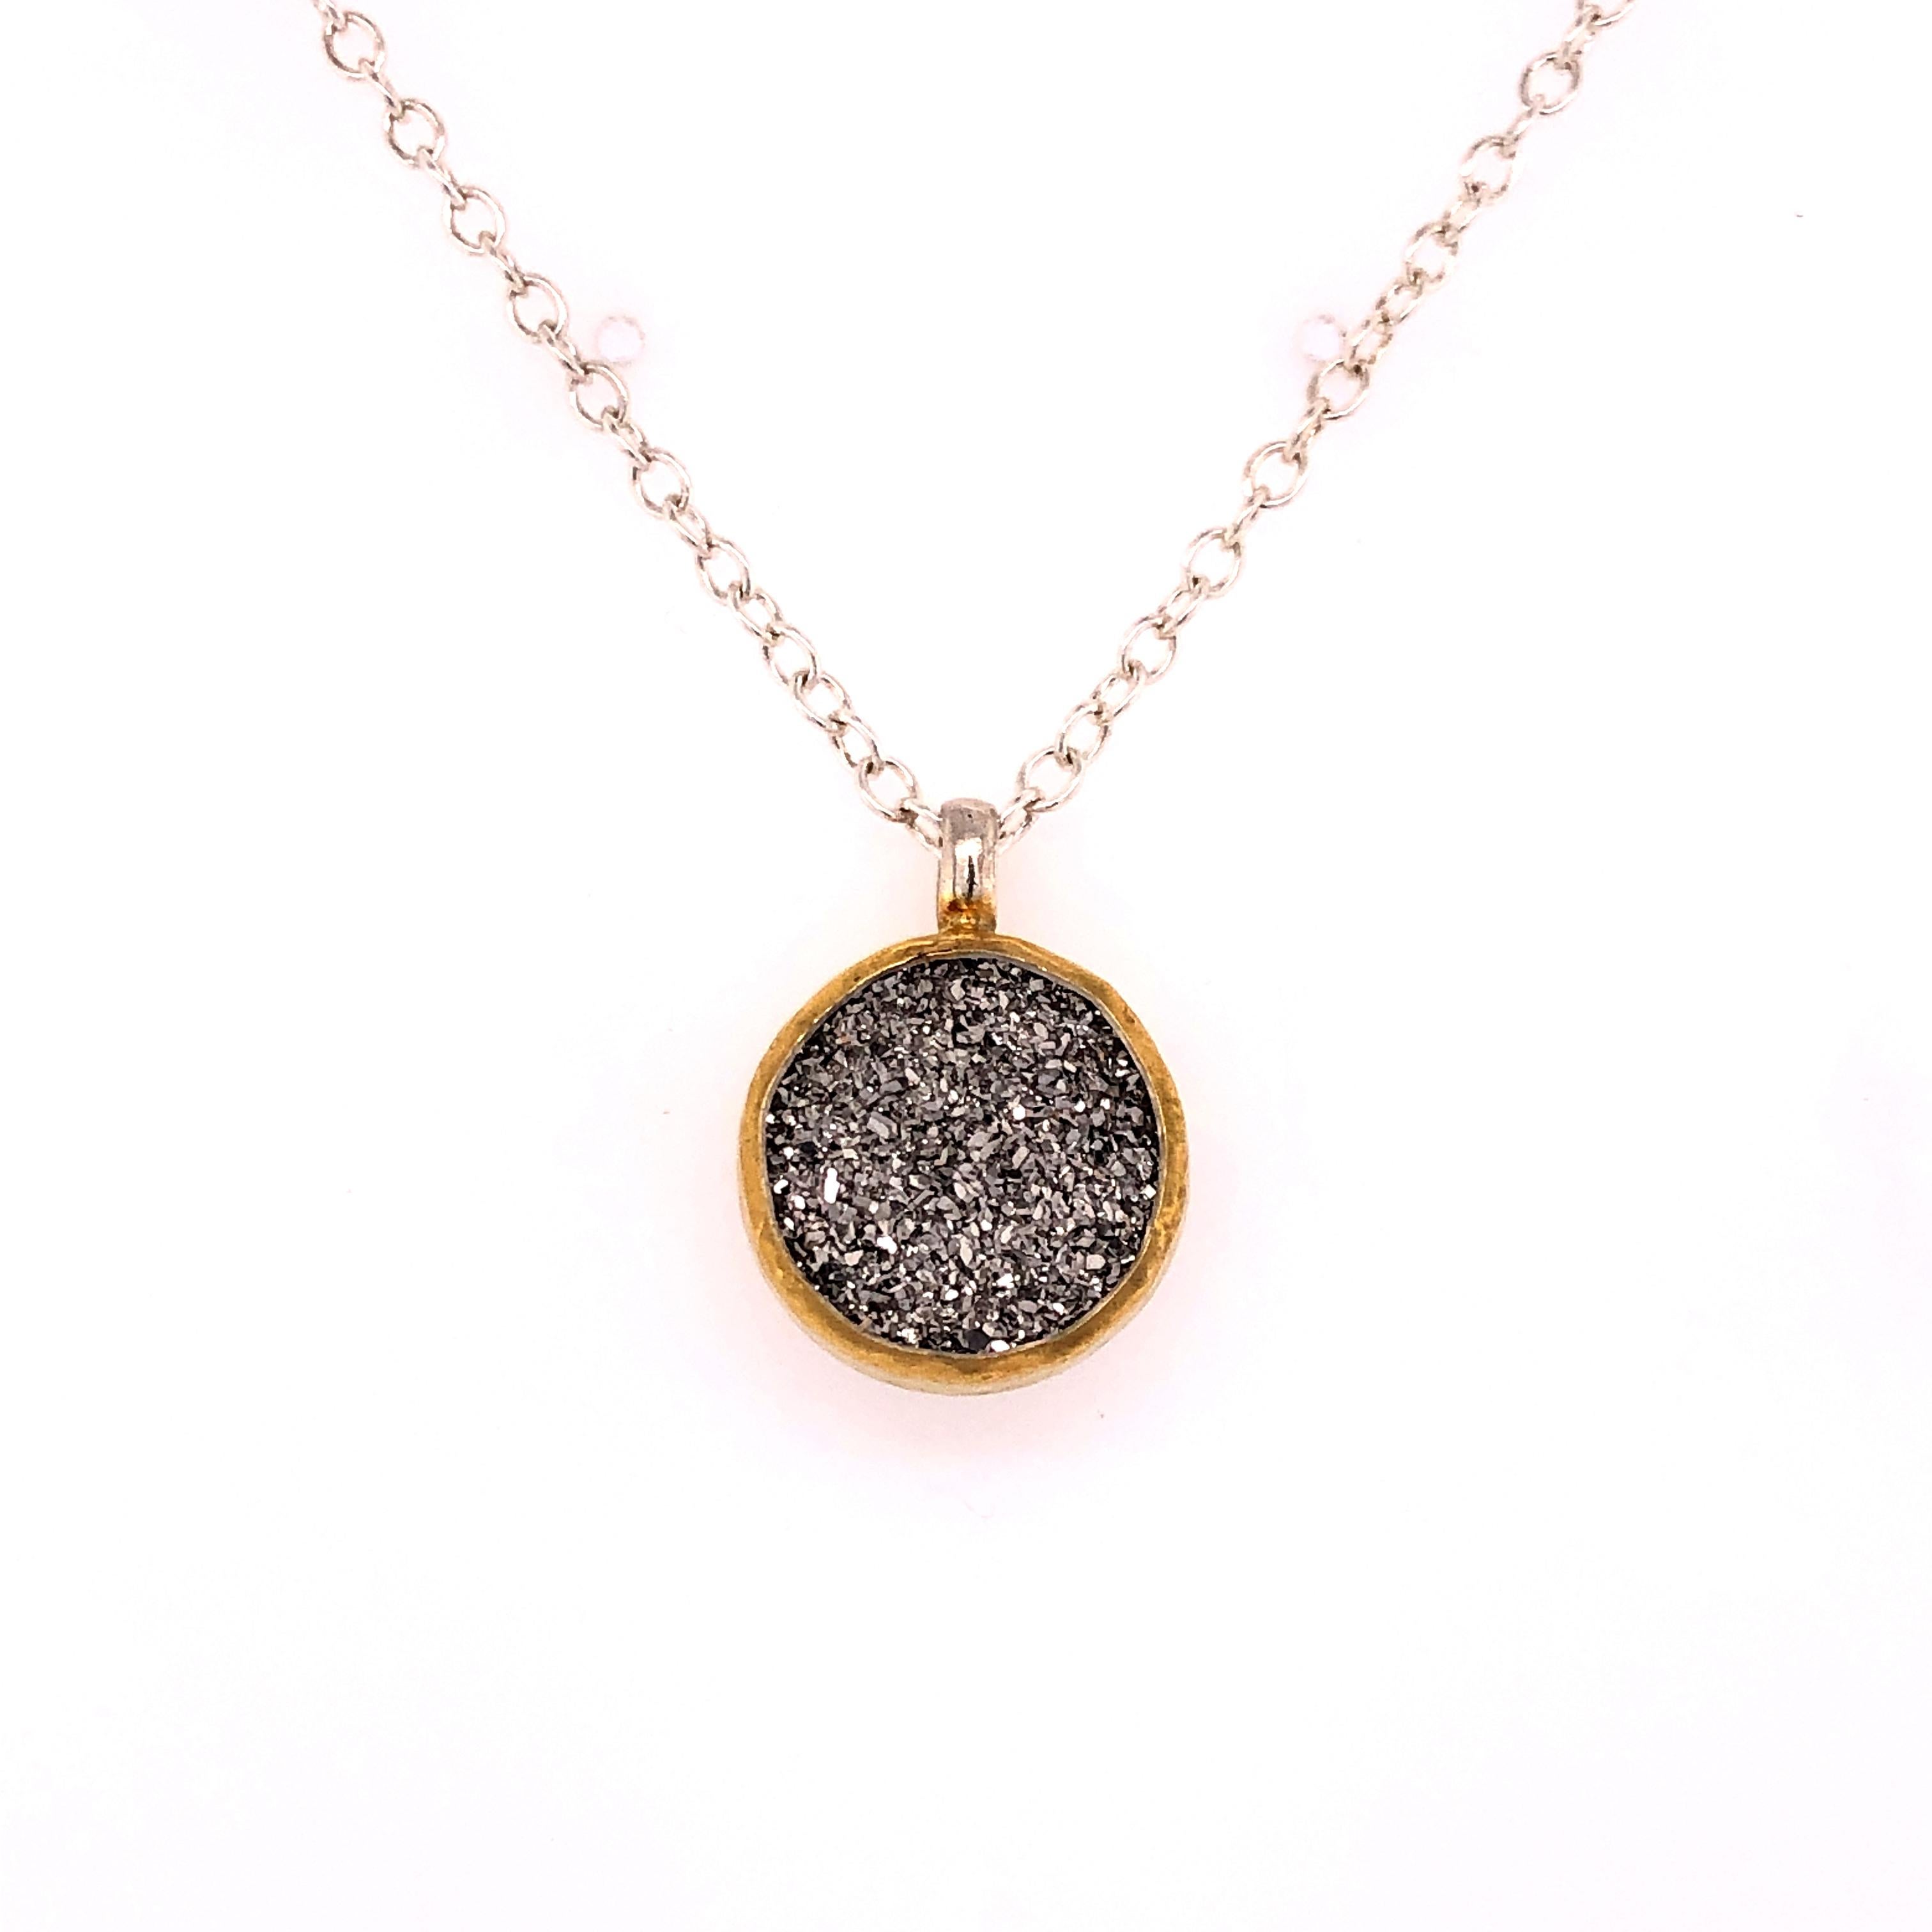 Sterling Silver & 24KY 15mm Druzy Quartz Pendant

Length: 18.5 inches

Stamped: Gurhan, 925H, NA48642

